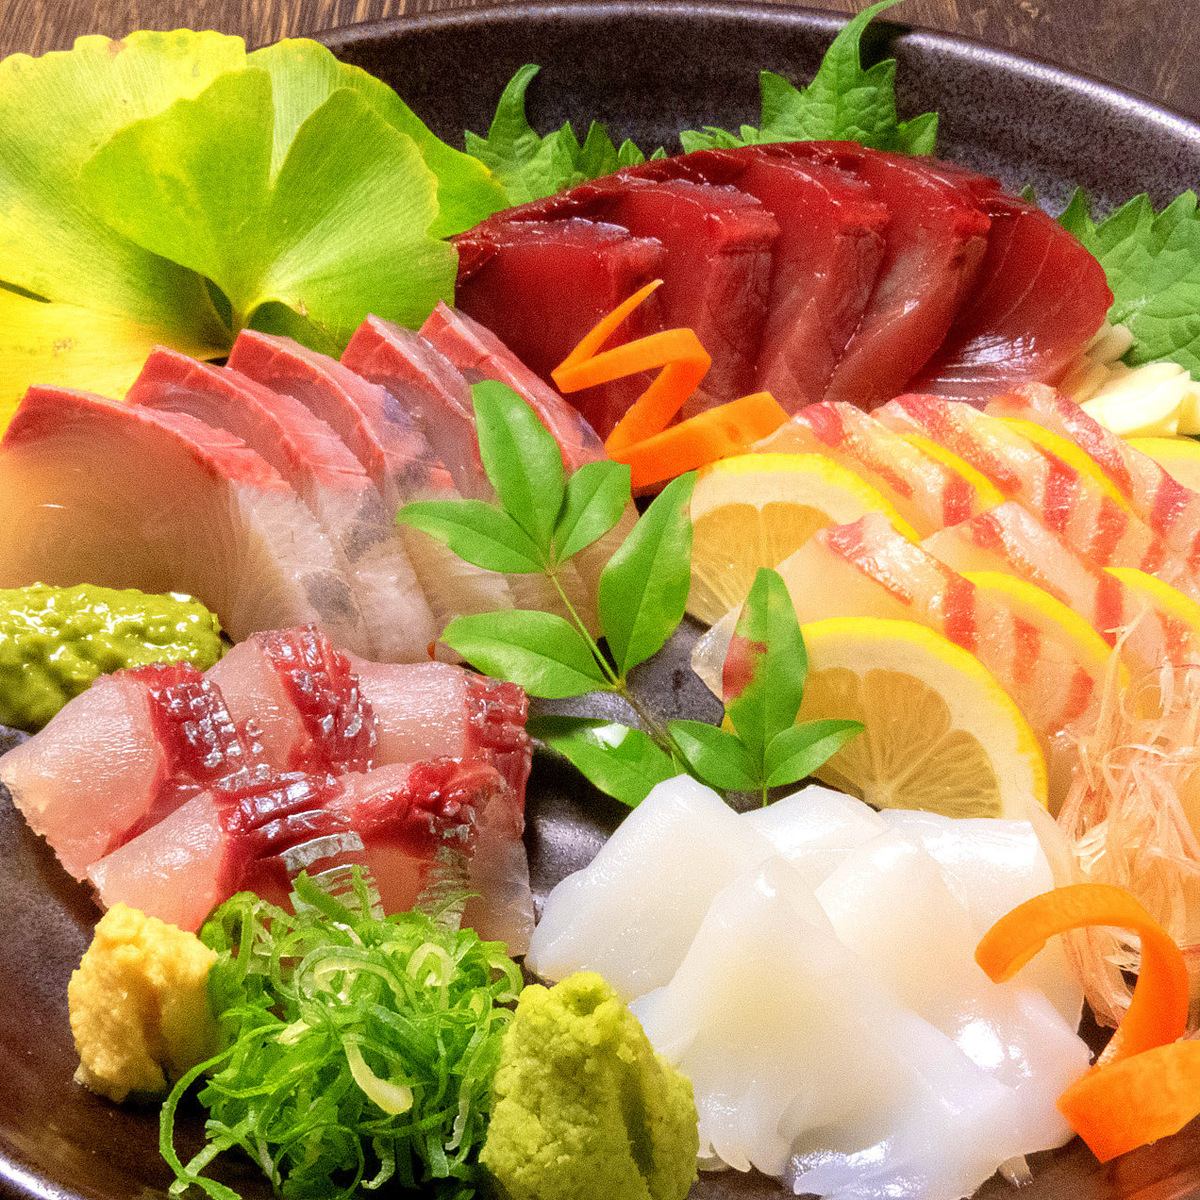 Our main business is wholesale of fresh fish! We provide fresh fish by our own route directly from Susaki ♪